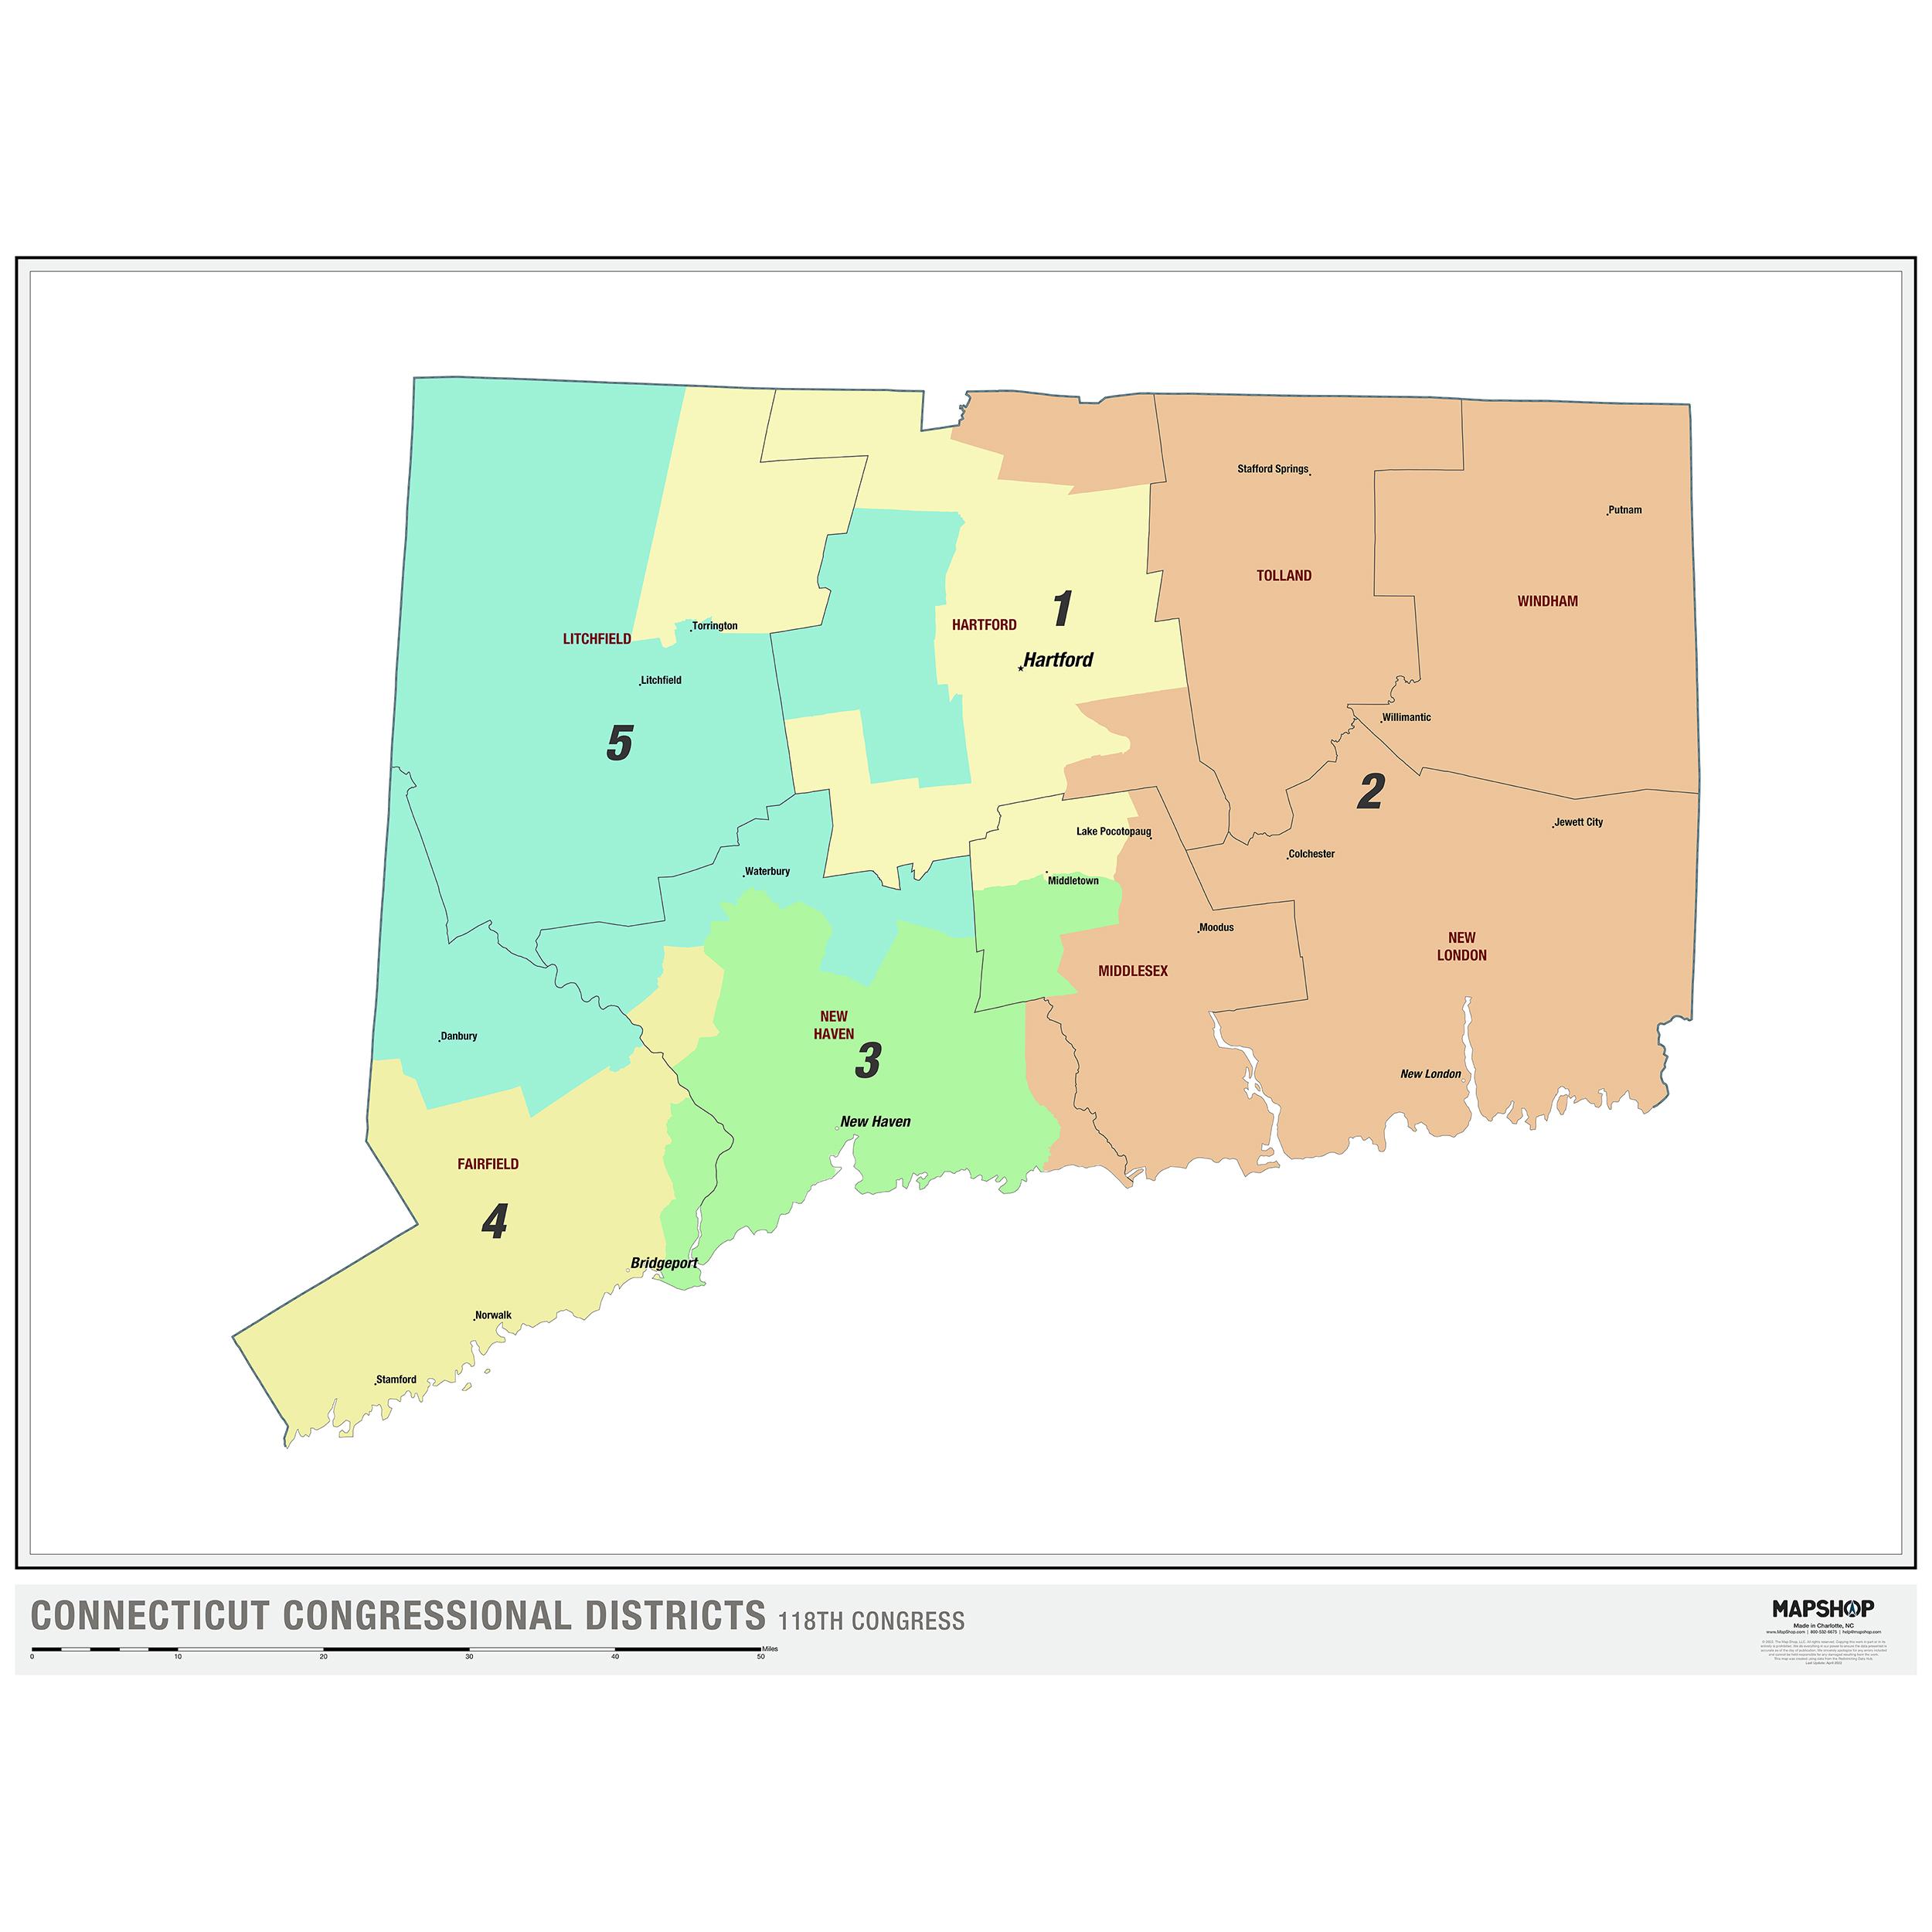 Connecticut Congressional Districts Wall Map By Mapshop The Map Shop ...